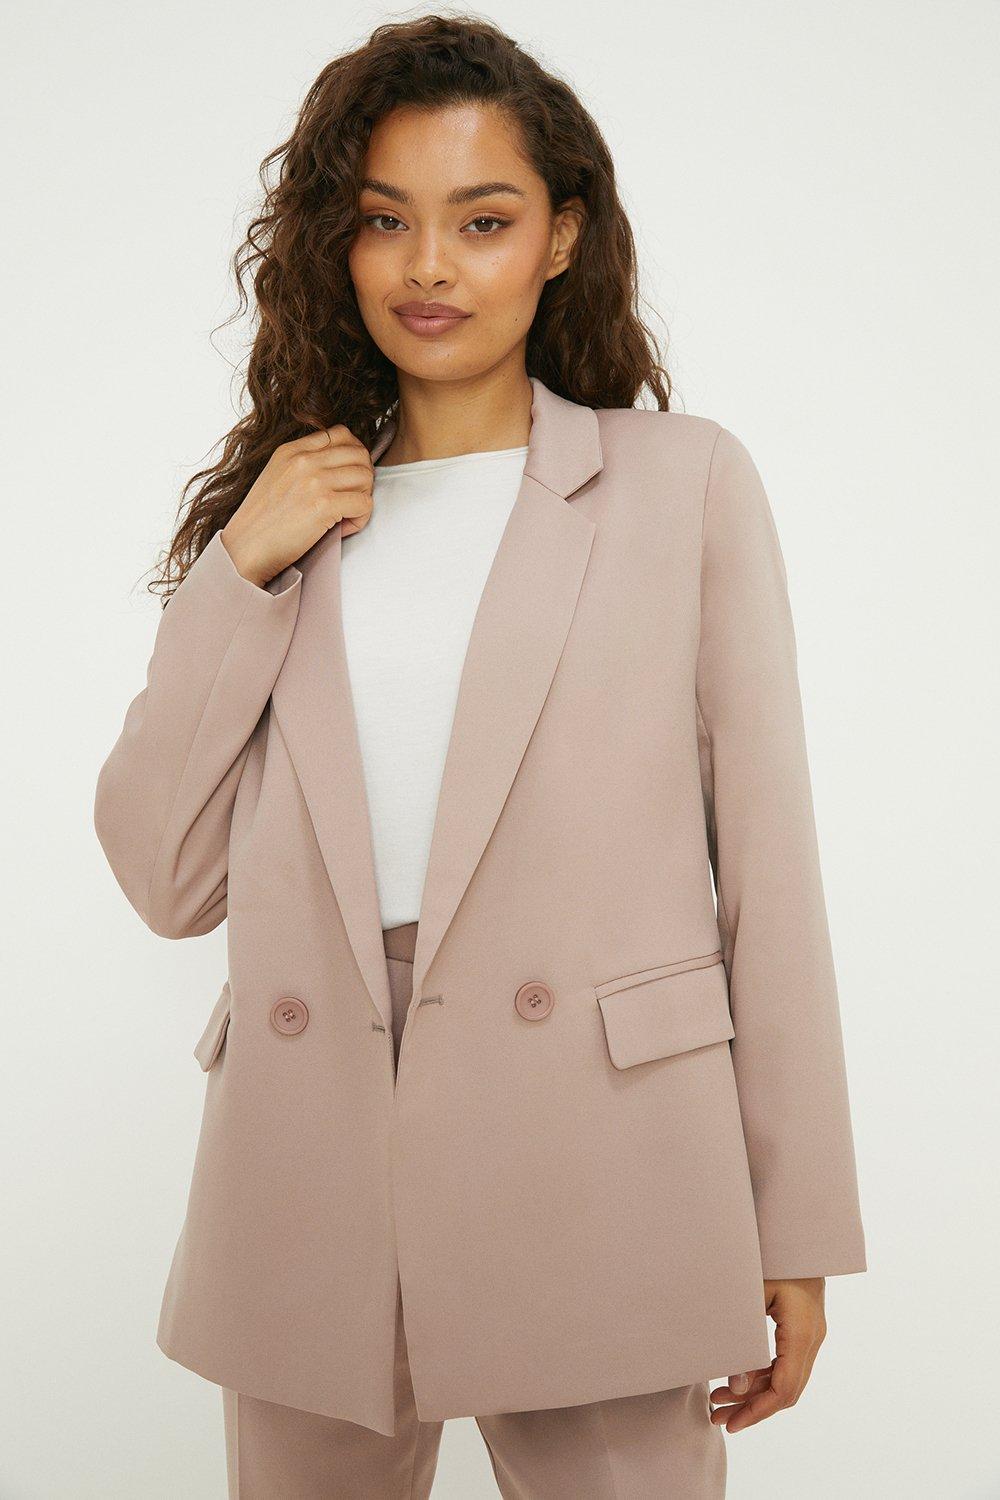 Women’s Petite Double Breasted Blazer - taupe - 14